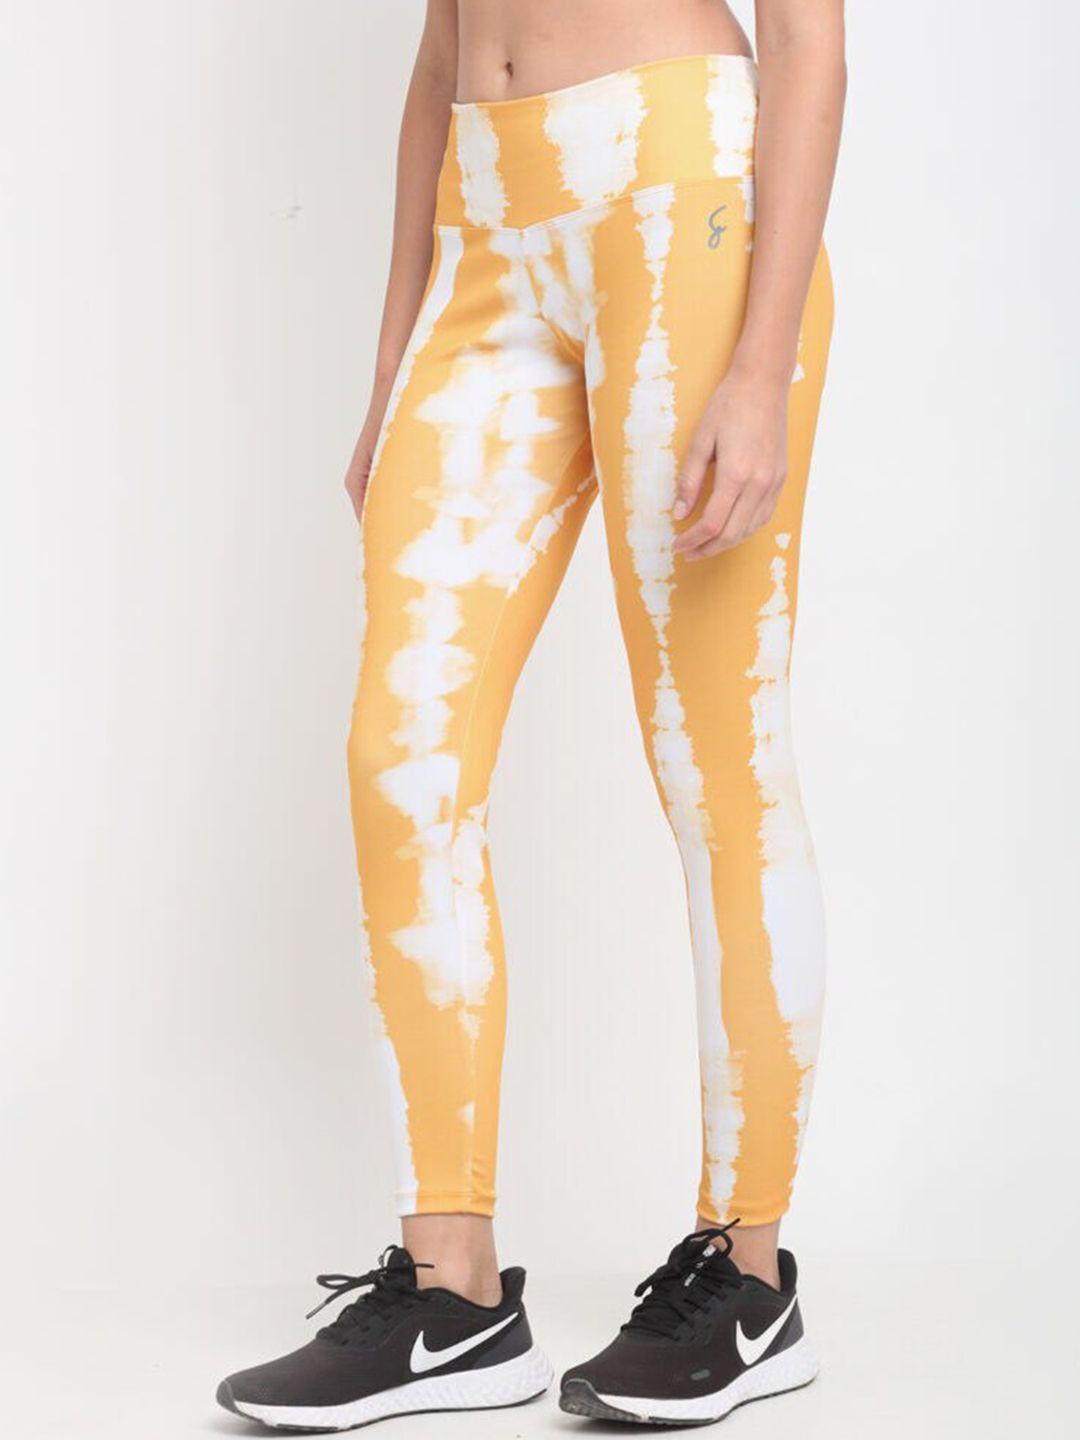 fitlethics women yellow printed tights